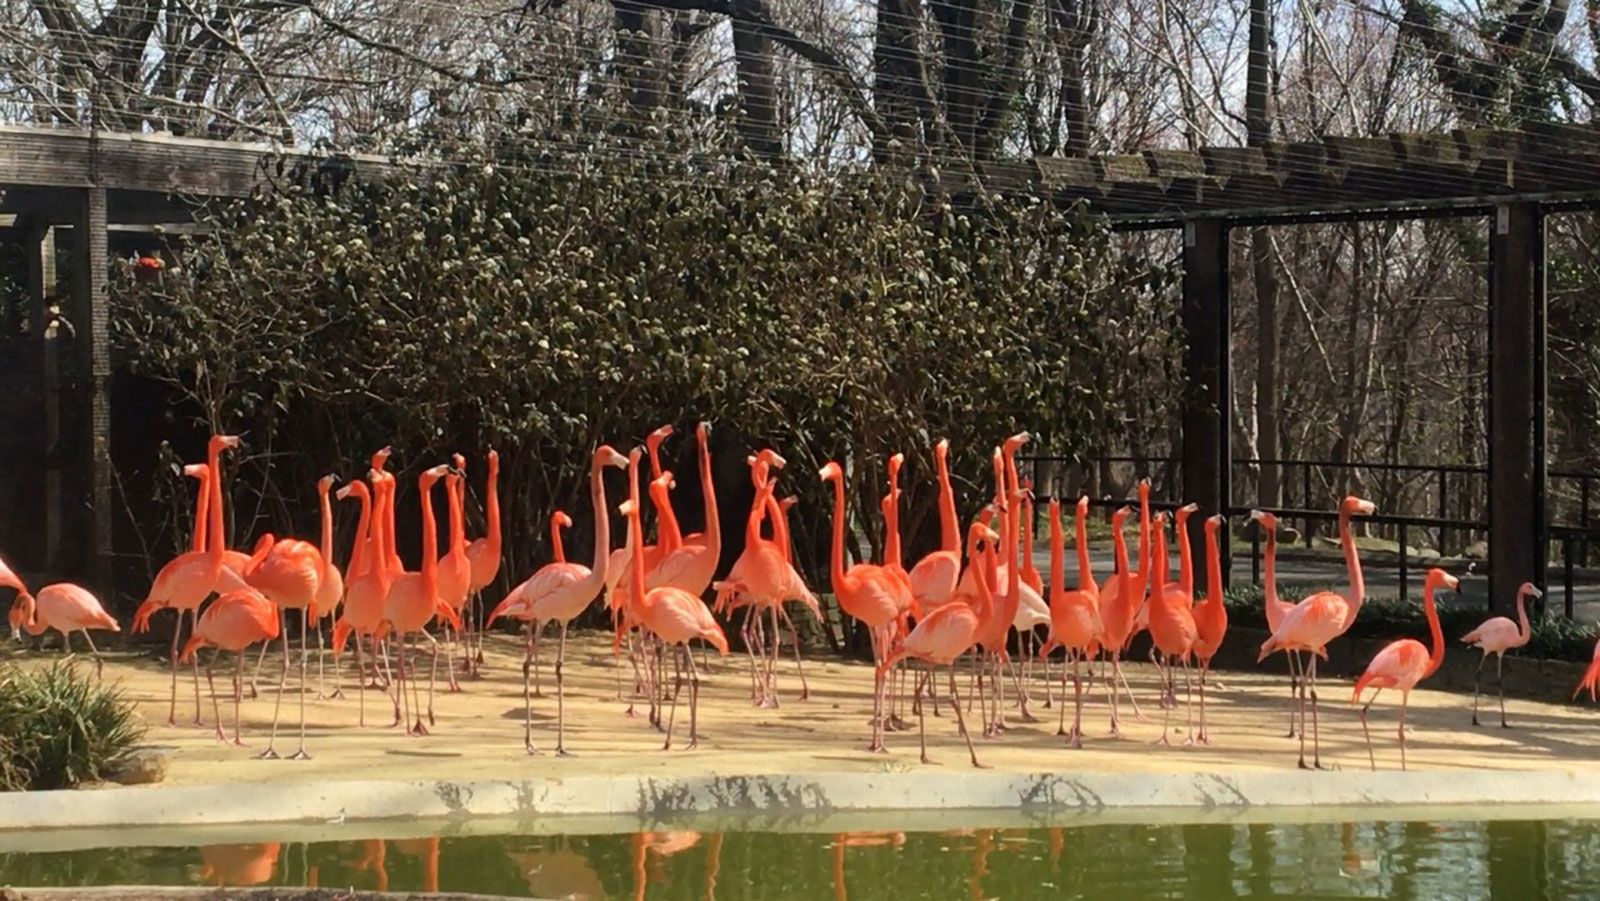 National Zoo says a wild fox killed 25 of its flamingos and a duck | CNN  Politics